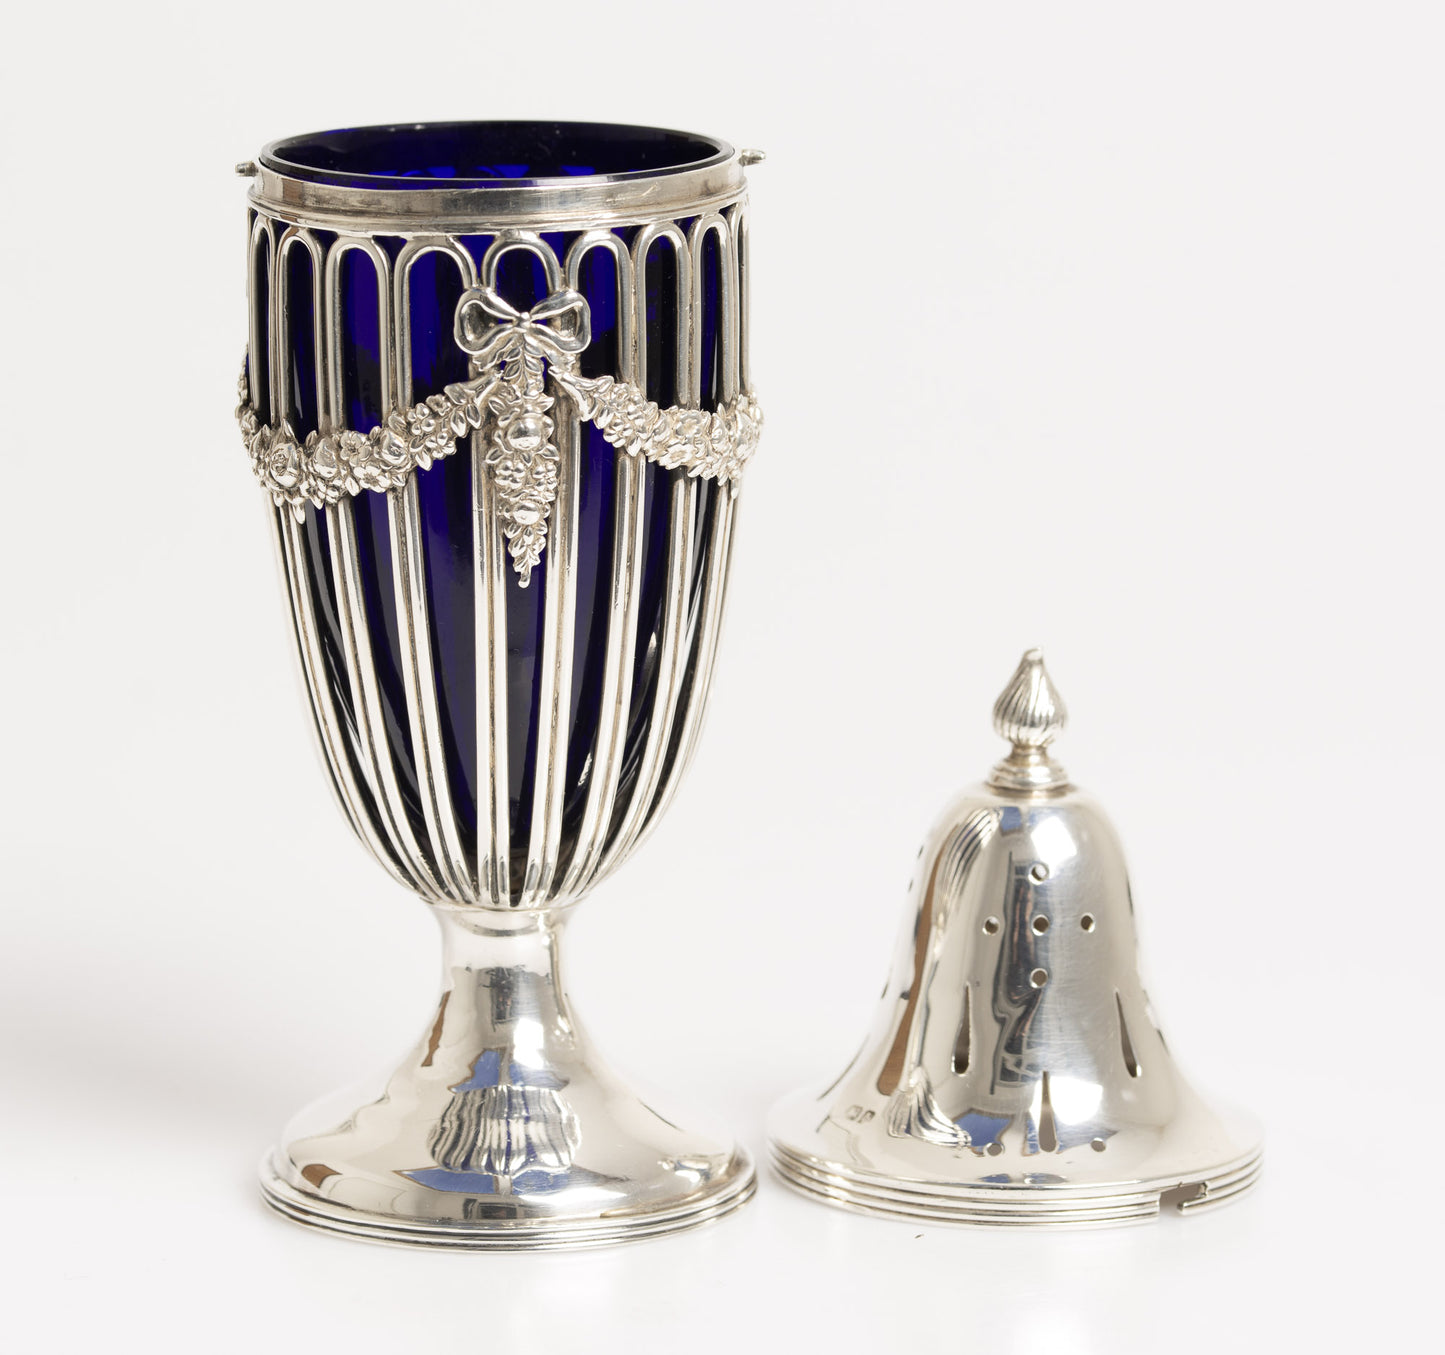 Antique Edwardian William Hutton Sterling Silver With Blue Glass Sugar Caster / Shaker (3054)